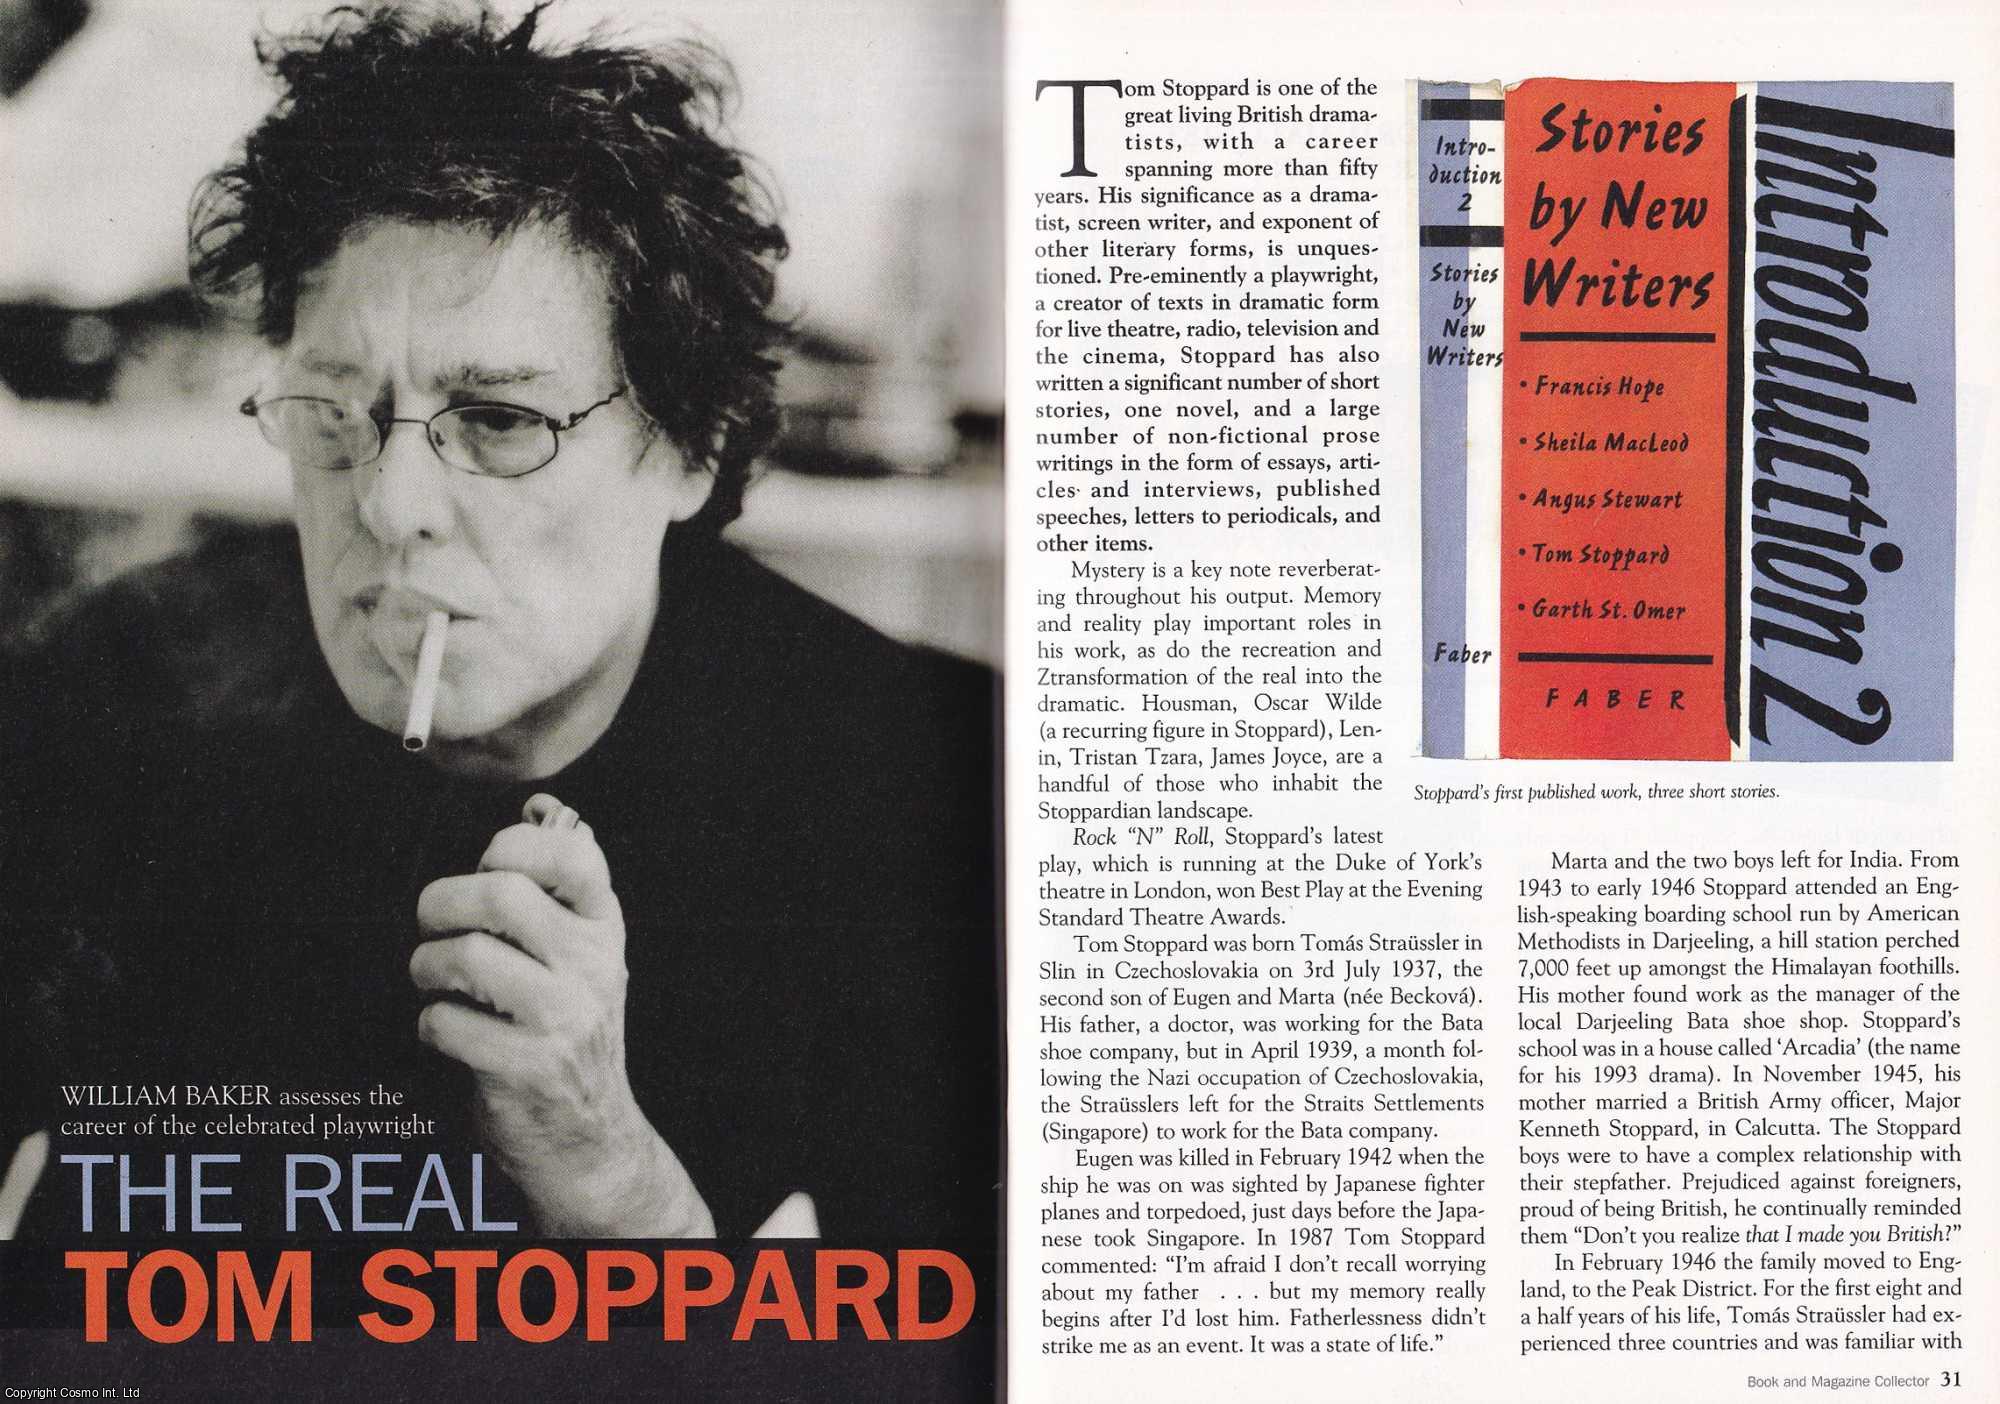 William Baker - The Real Tom Stoppard. Assessing The Career of The Celebrated Playwright. This is an original article separated from an issue of The Book & Magazine Collector publication.